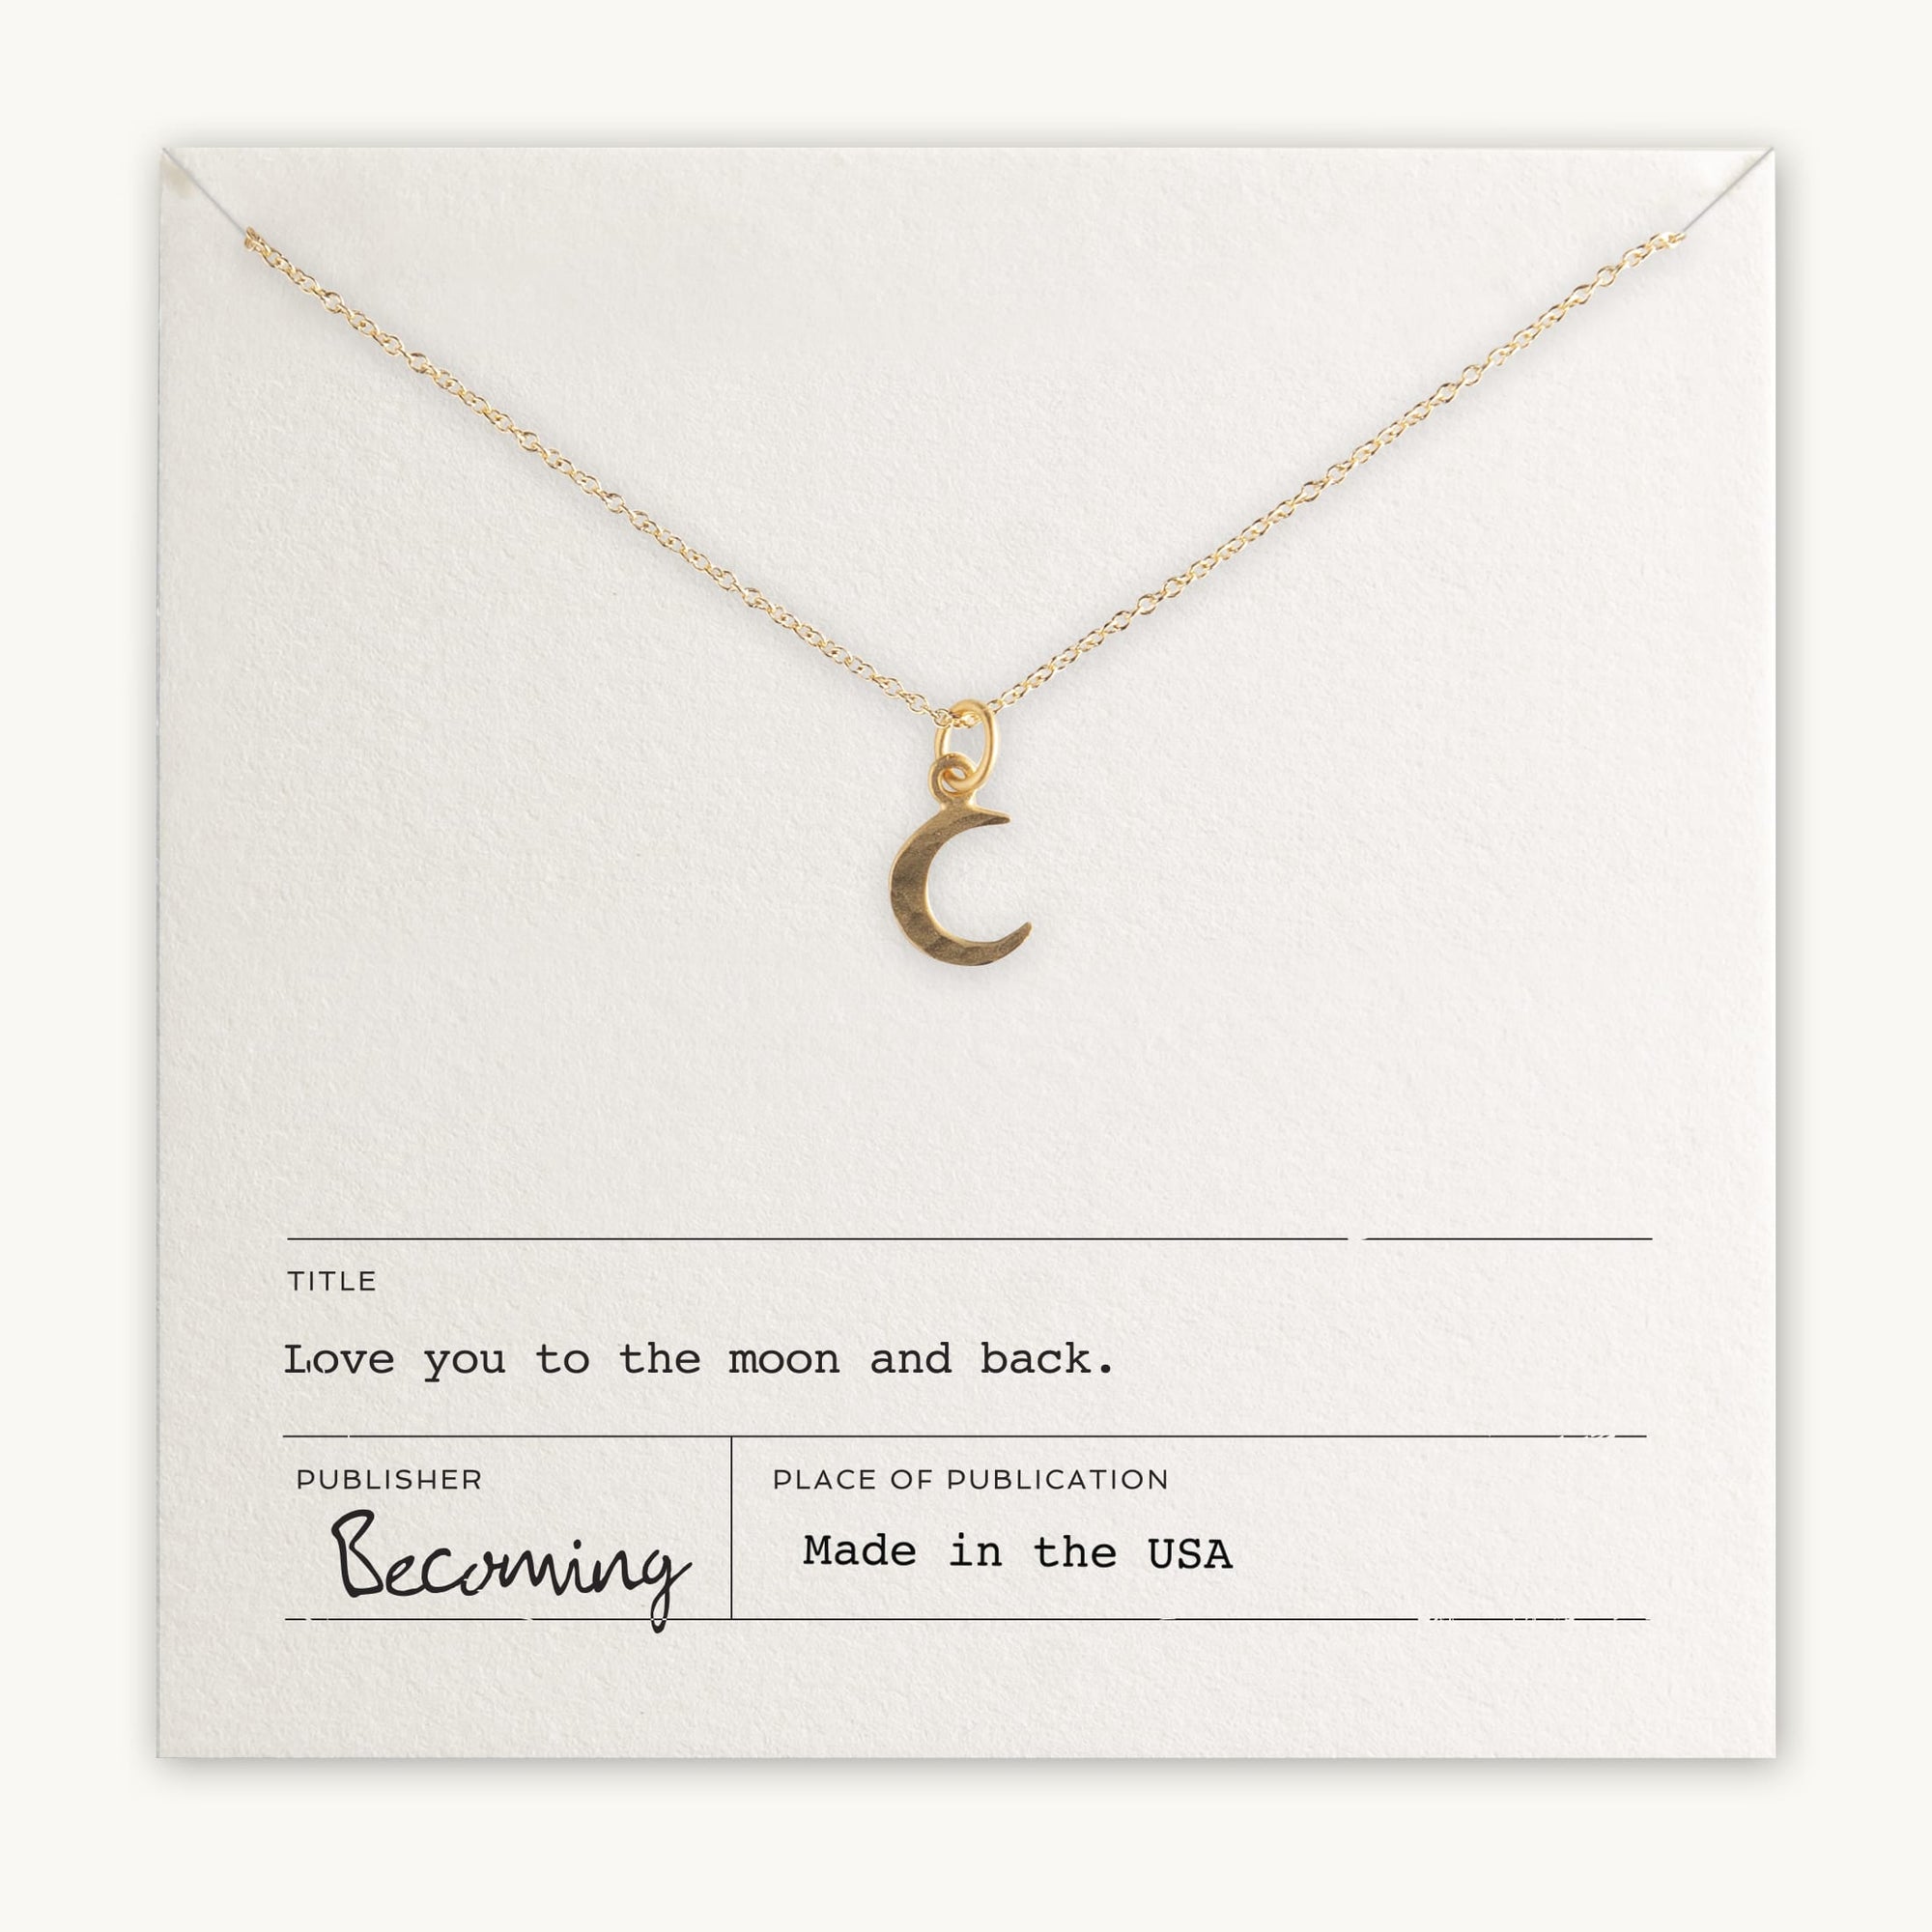 Gold-filled Love You To The Moon Necklace charm pendant on a chain displayed on a card with the inscription &quot;love you to the moon and back&quot; by Becoming Jewelry, made in the USA.